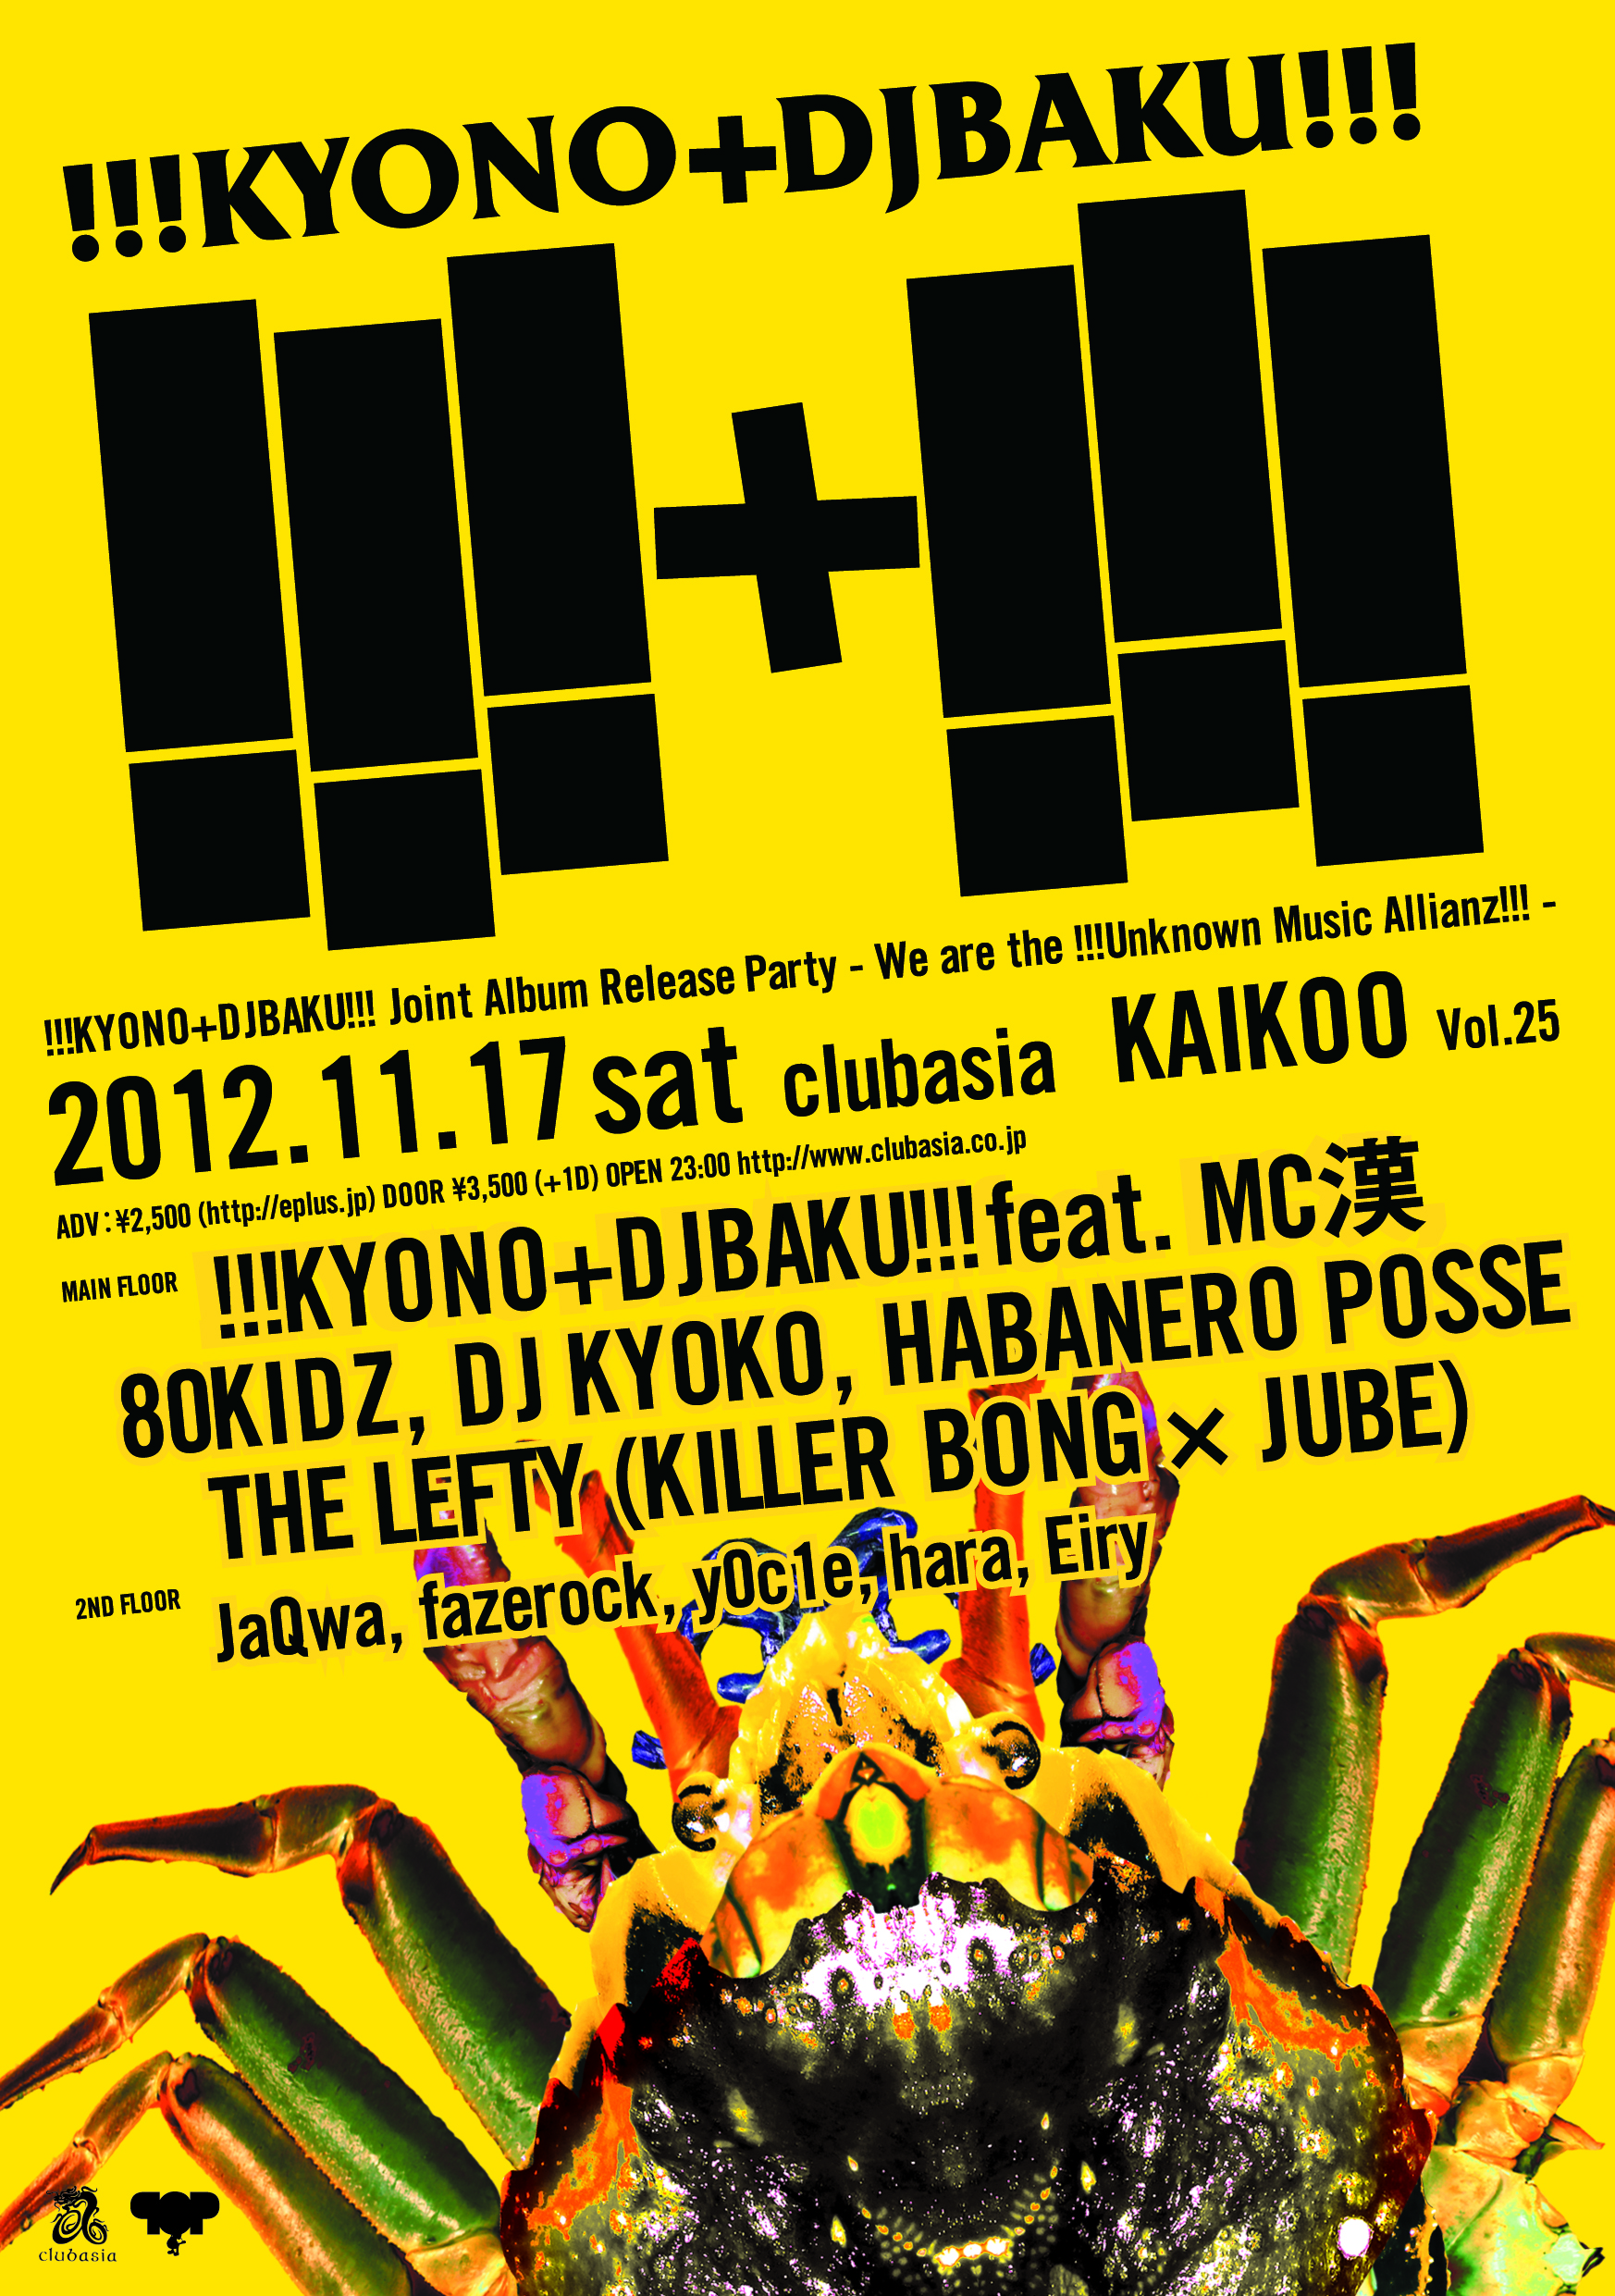 KAIKOO Vol.25 !!!KYONO+DJBAKU!!! Joint Album Release Party  - We are the !!!Unknown Music Allianz!!! -